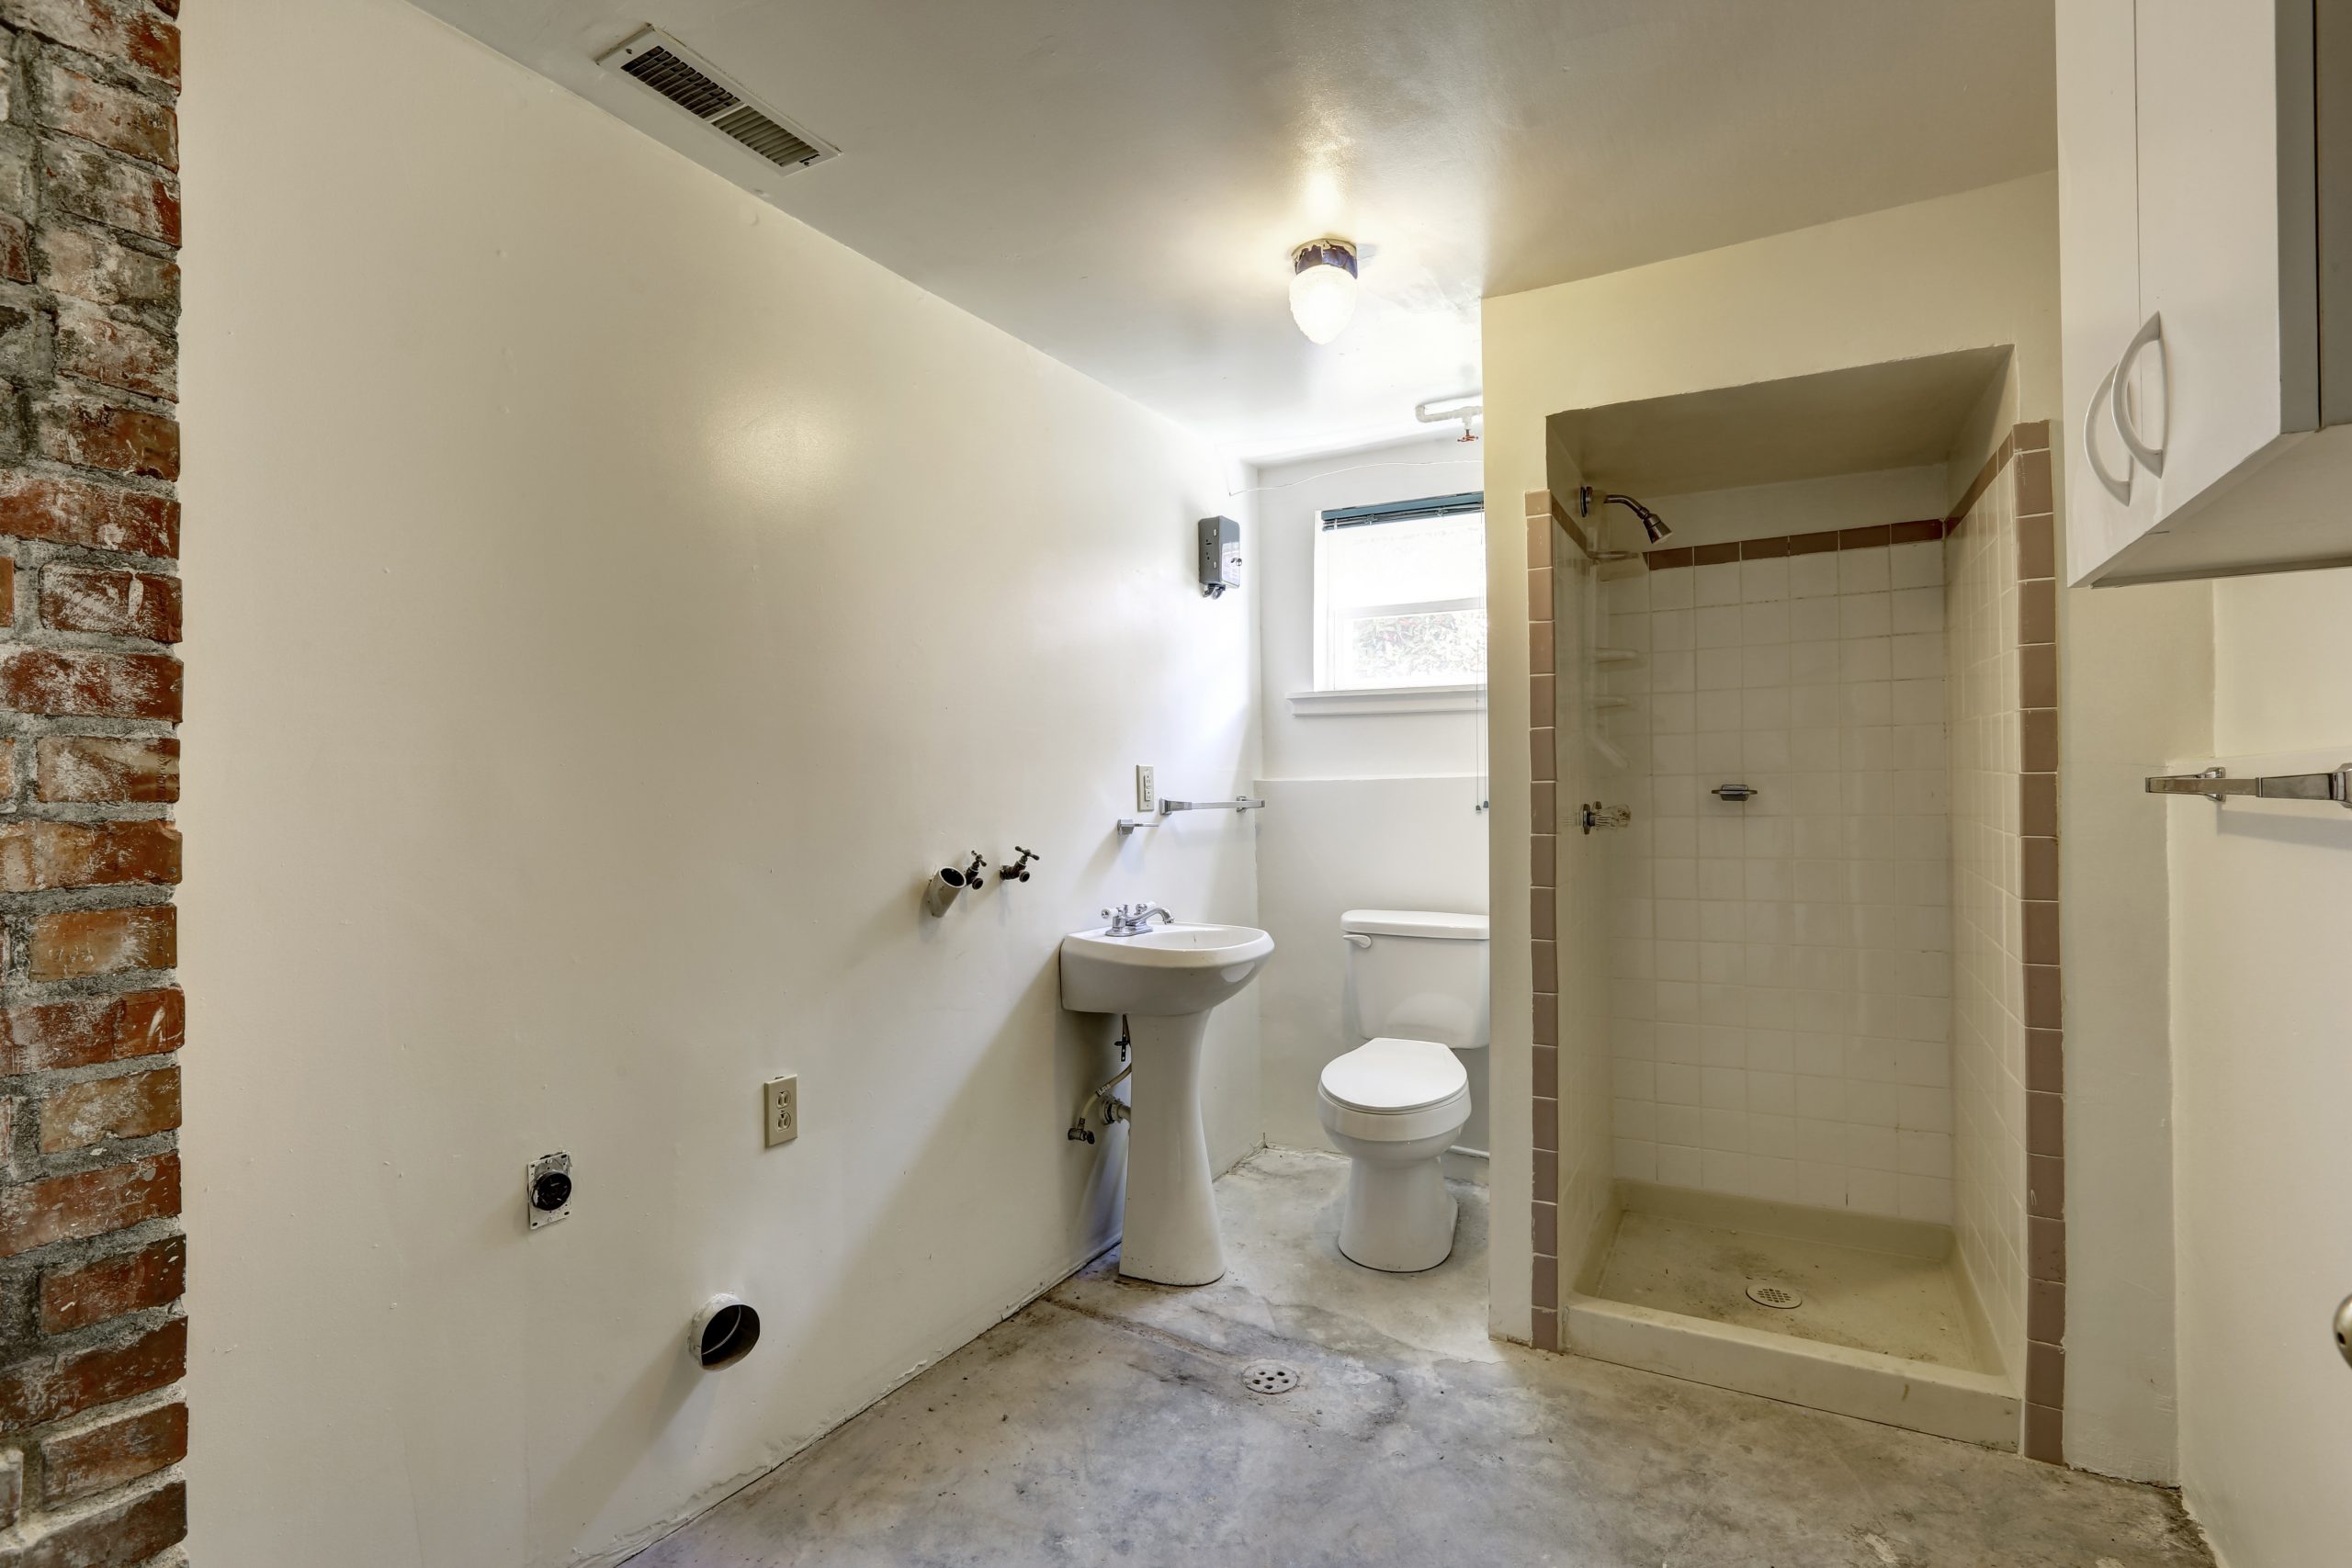 The Easiest ways to Make a Smaller Bathroom Appear Larger 